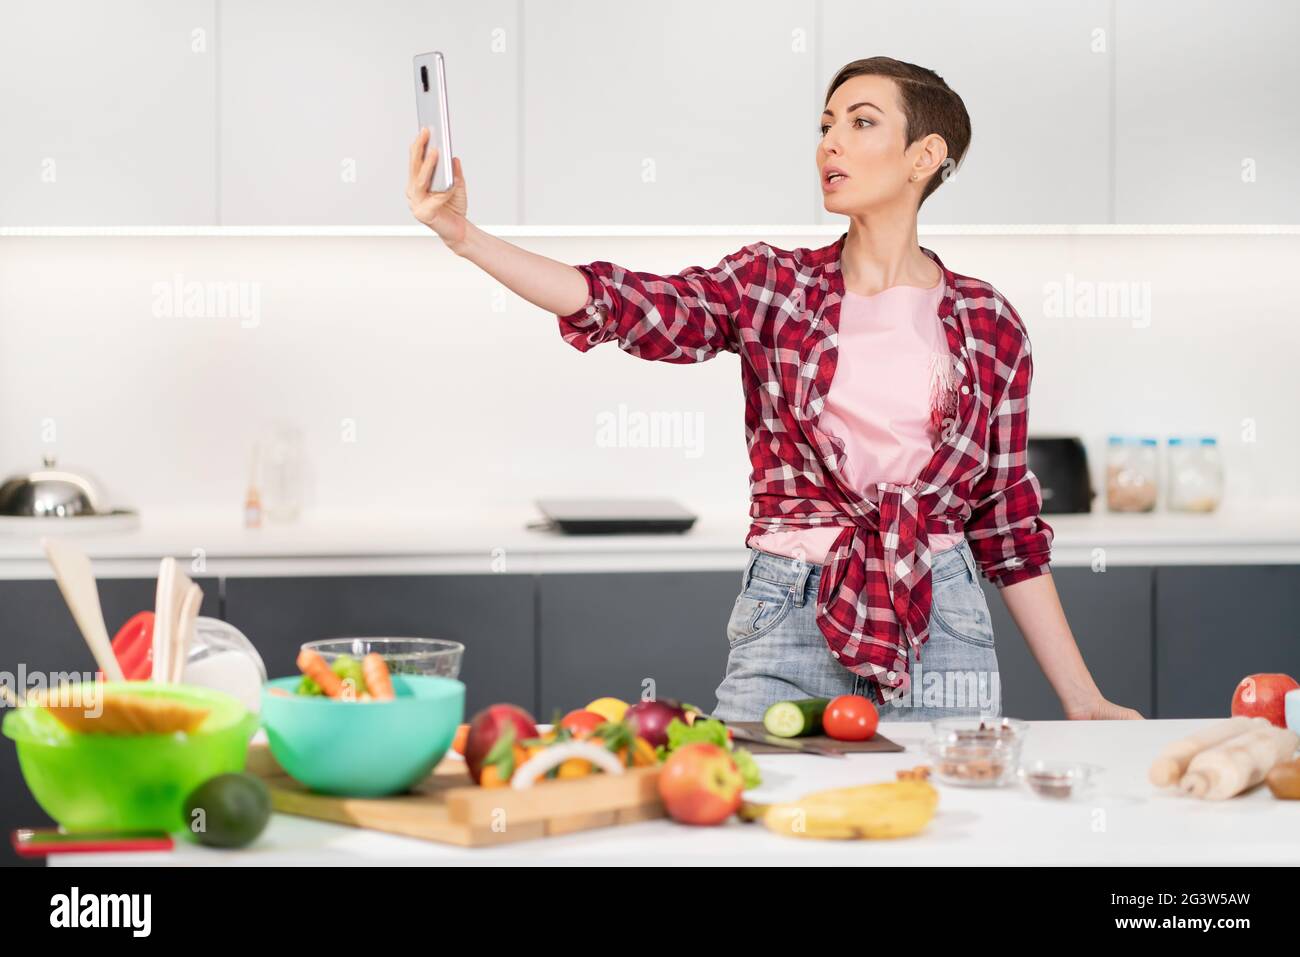 Pretty woman taking selfie or making a video call using her smartphone holding it in outstretched arm while cooking fresh salad Stock Photo